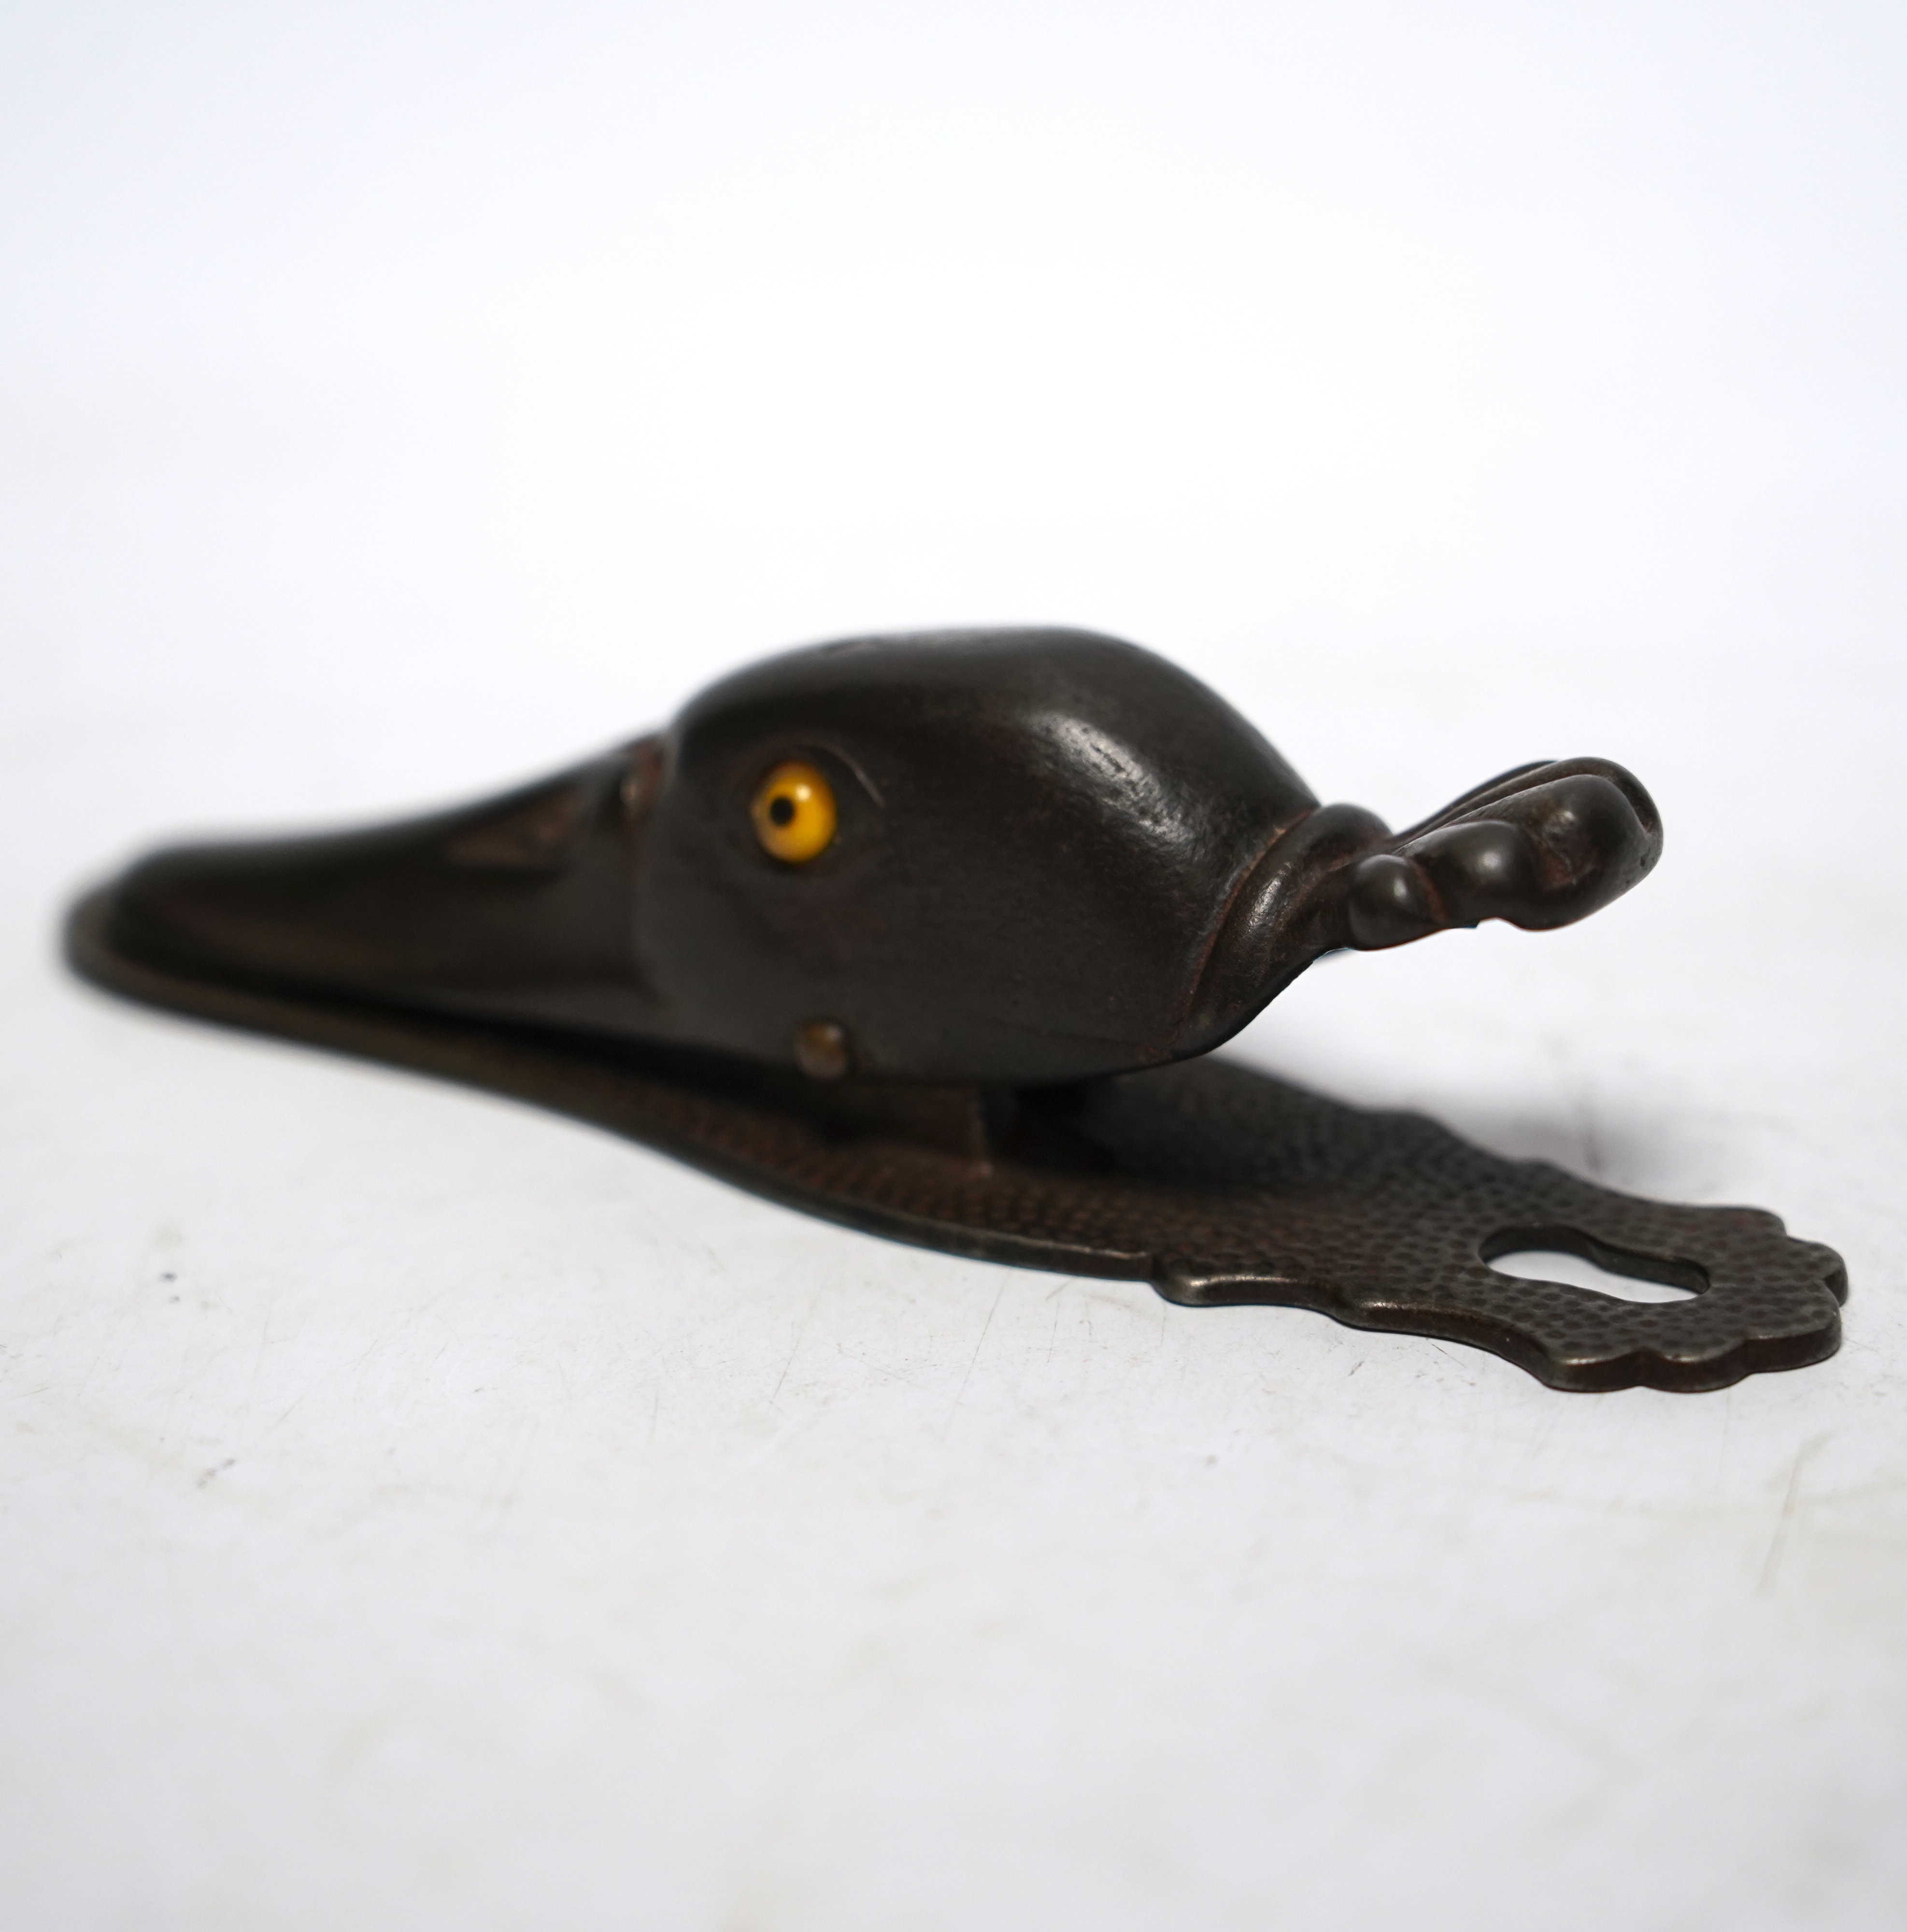 A base metal, glass eyed duck’s head letter clip, with stamp on base: 5180, 13cm long